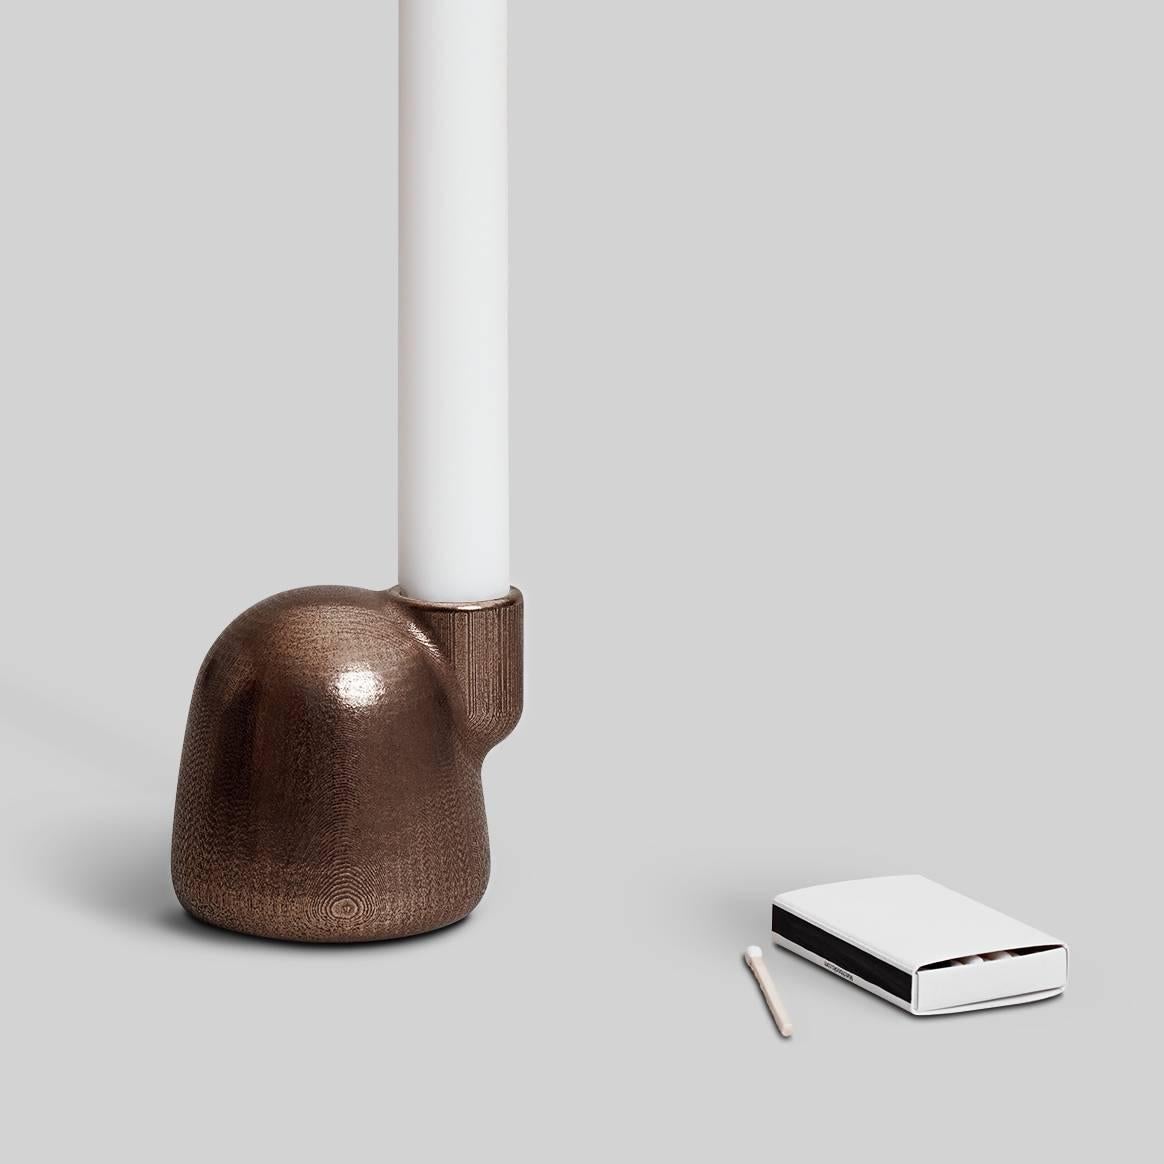 The EE Candleholder tells its own origin story. Inspired by the way that growth is expressed in nature, the candleholder's layers of digitally printed grain act like the rings in trees or layers of rock: they reflect the process required to create